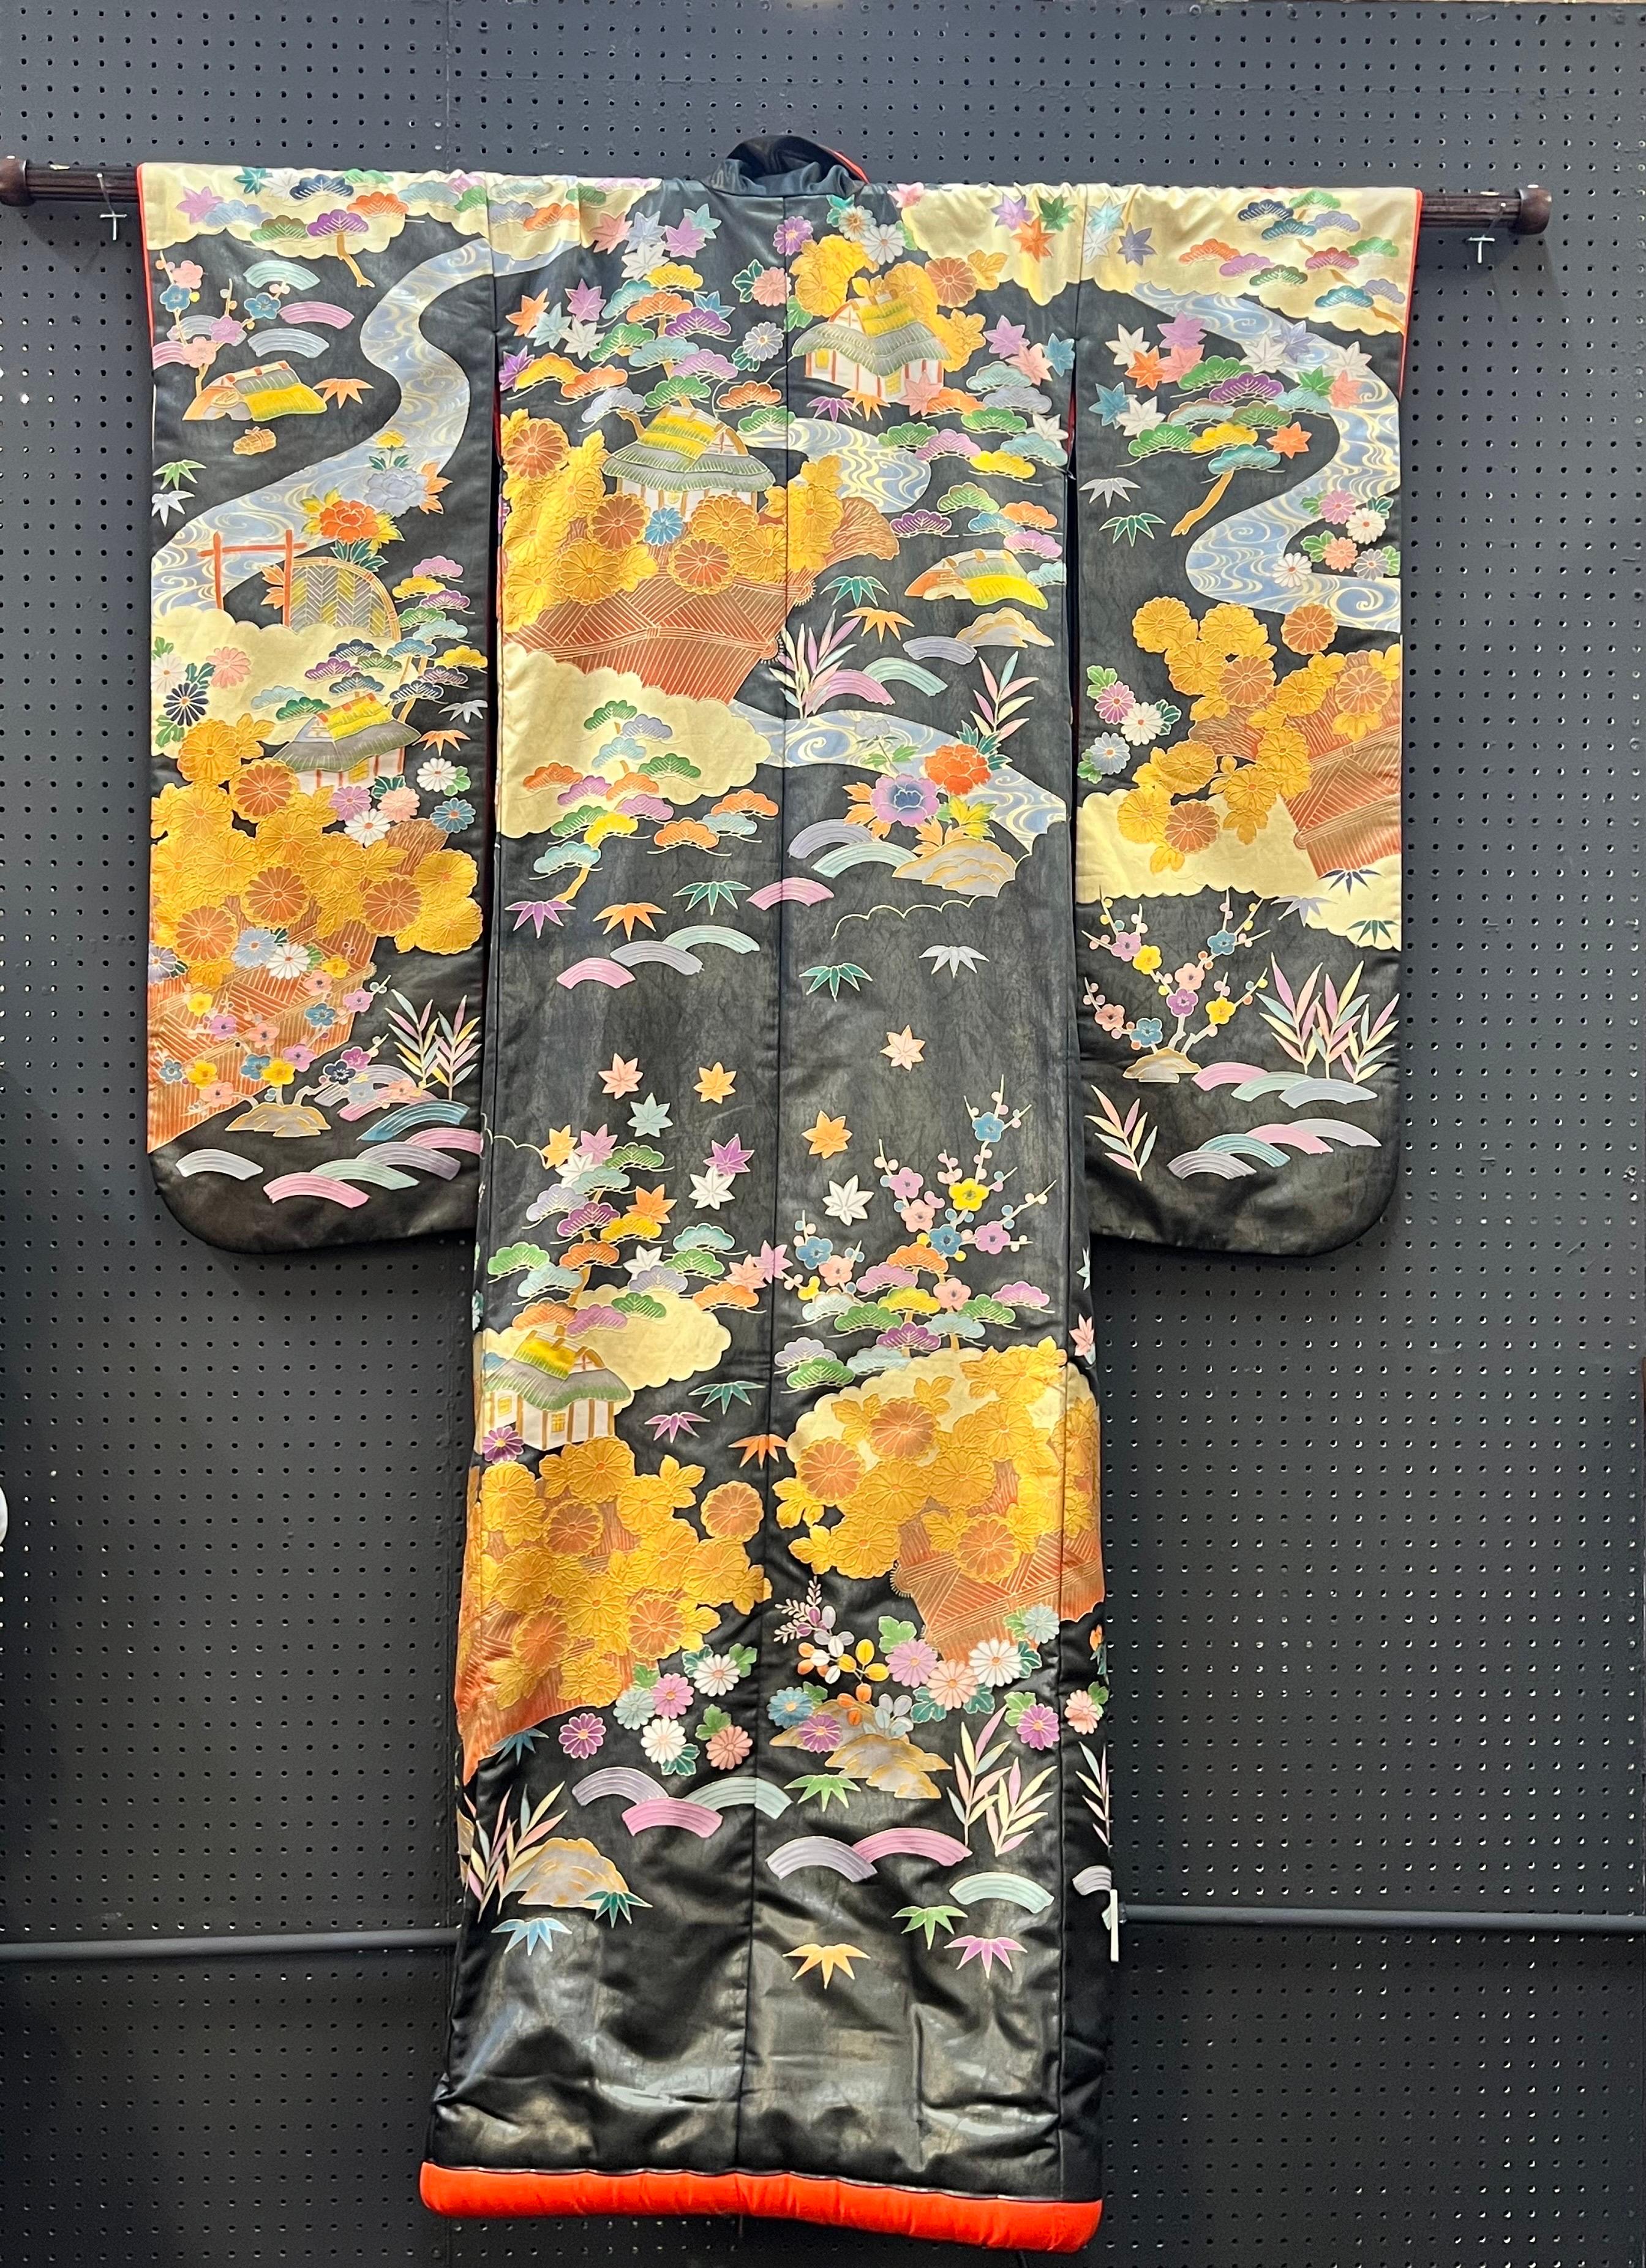 Stunning Japanese Wedding Kimono, hand painted with exceptional details in rich warm colores 
Has a red silk interior, wooden rod is included 
An incredible piece that hangs about  75” long  by 50” wide, the body section is 22” wide 
if you are